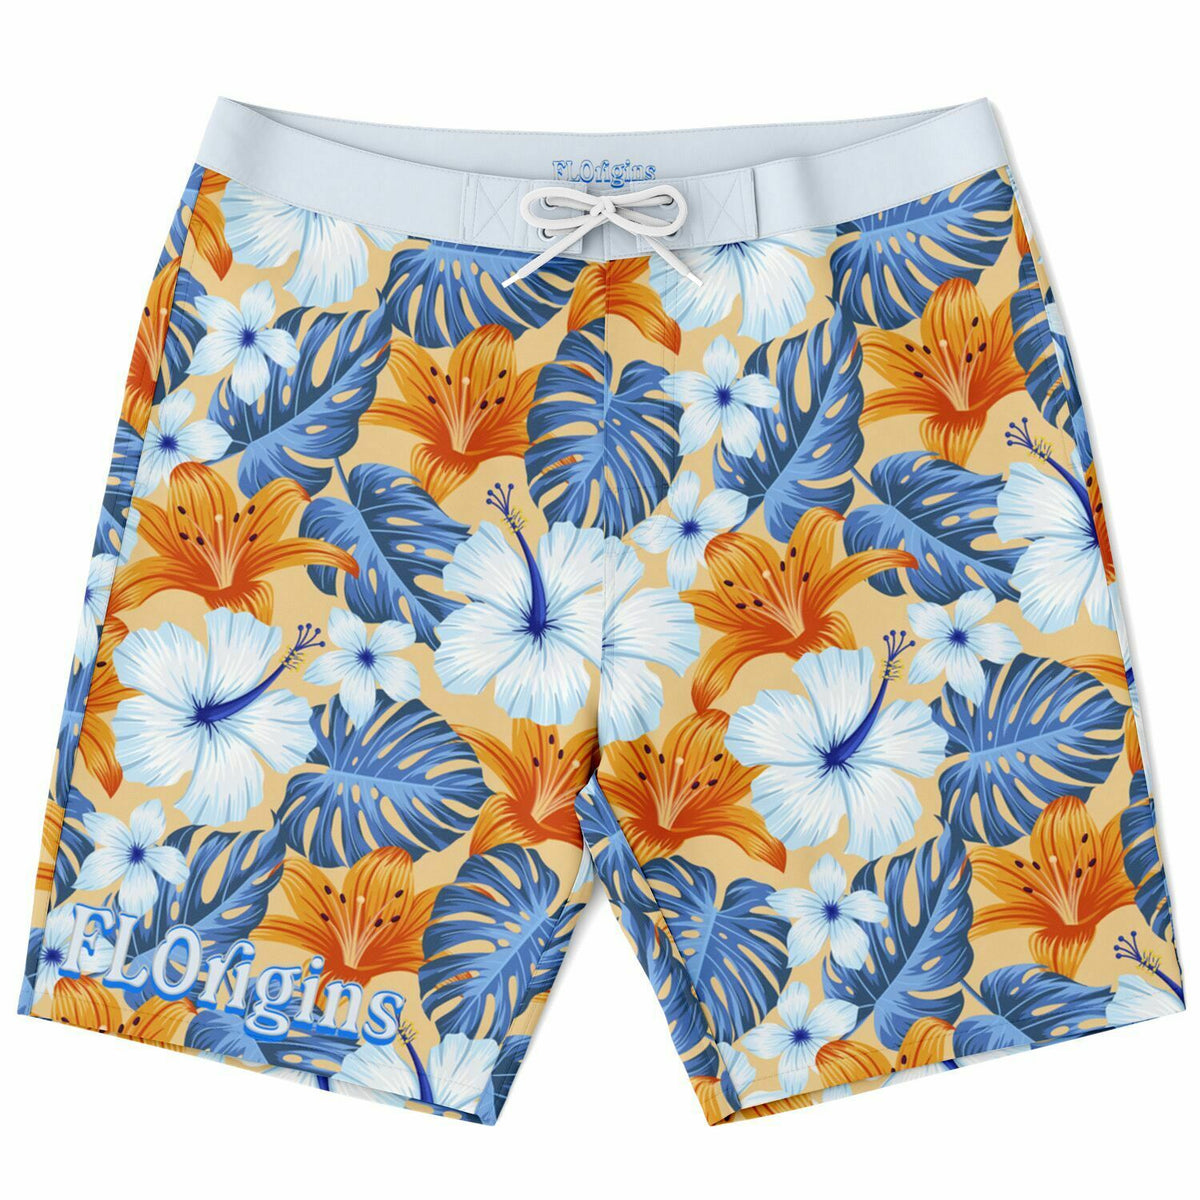 FLOBiscus Board Shorts